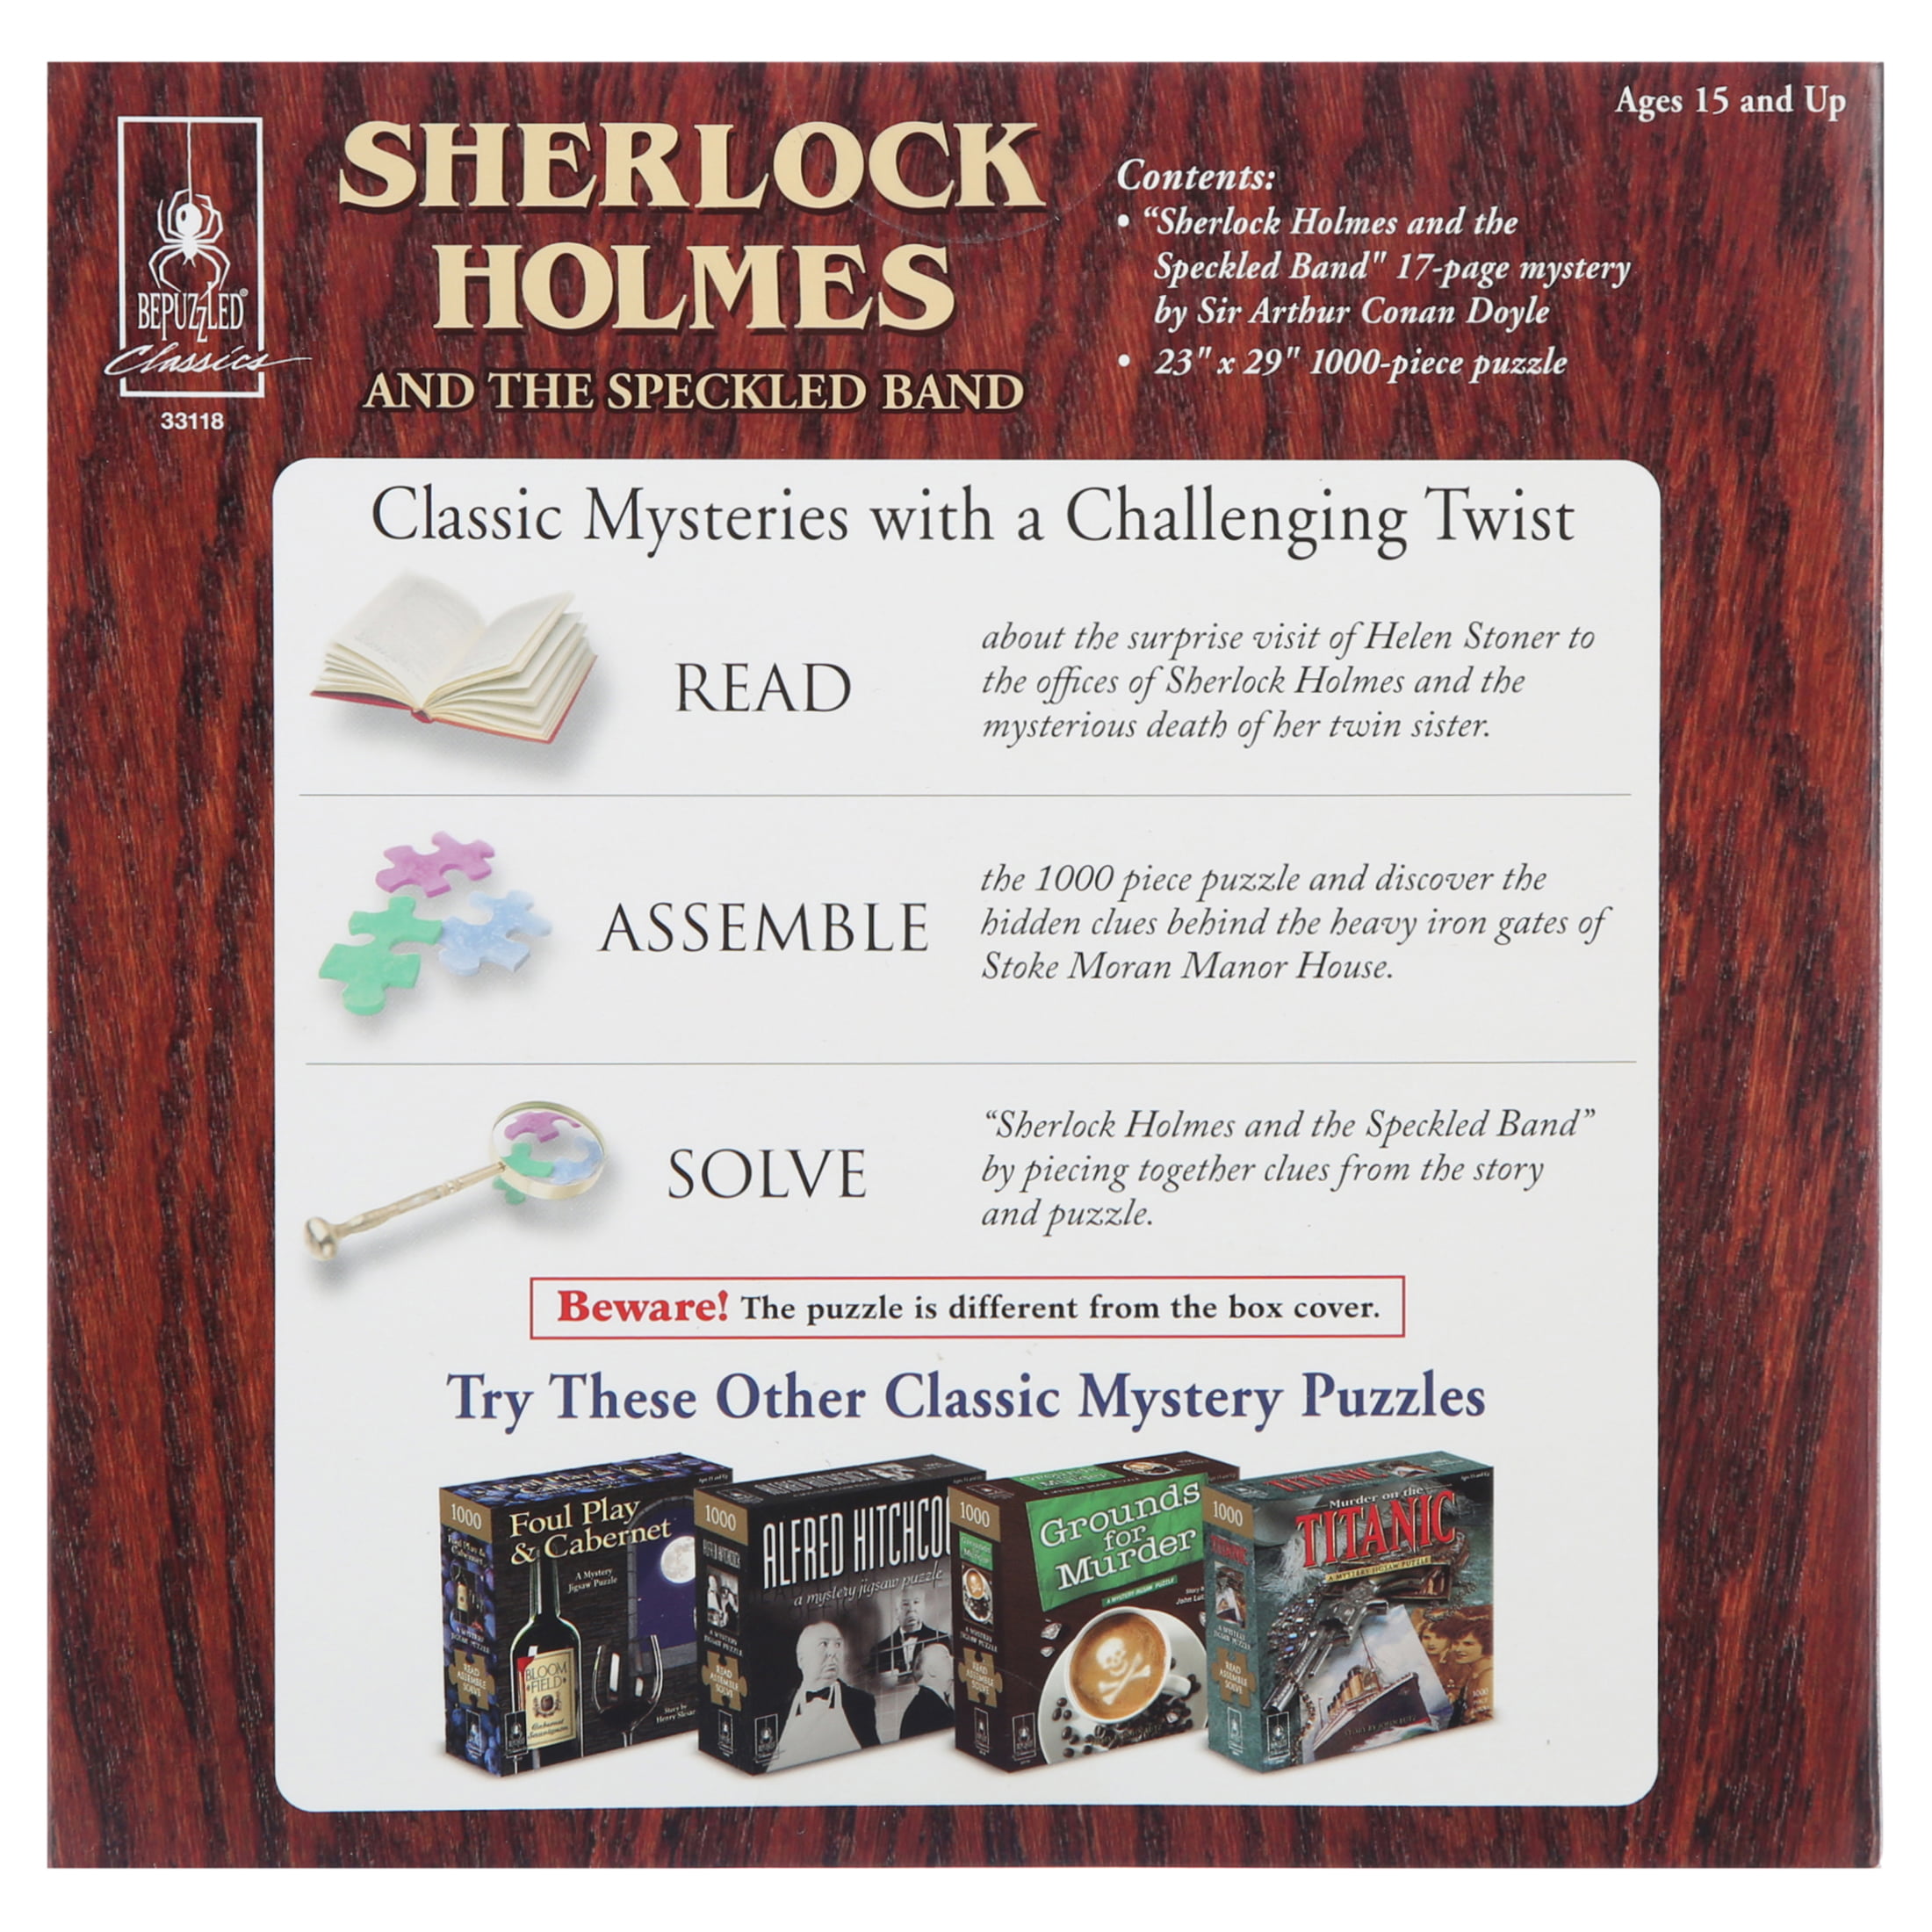 SHERLOCK HOLMES MYSTERY Jigsaw PUZZLE 1000 pieces Read Assemble Solve 